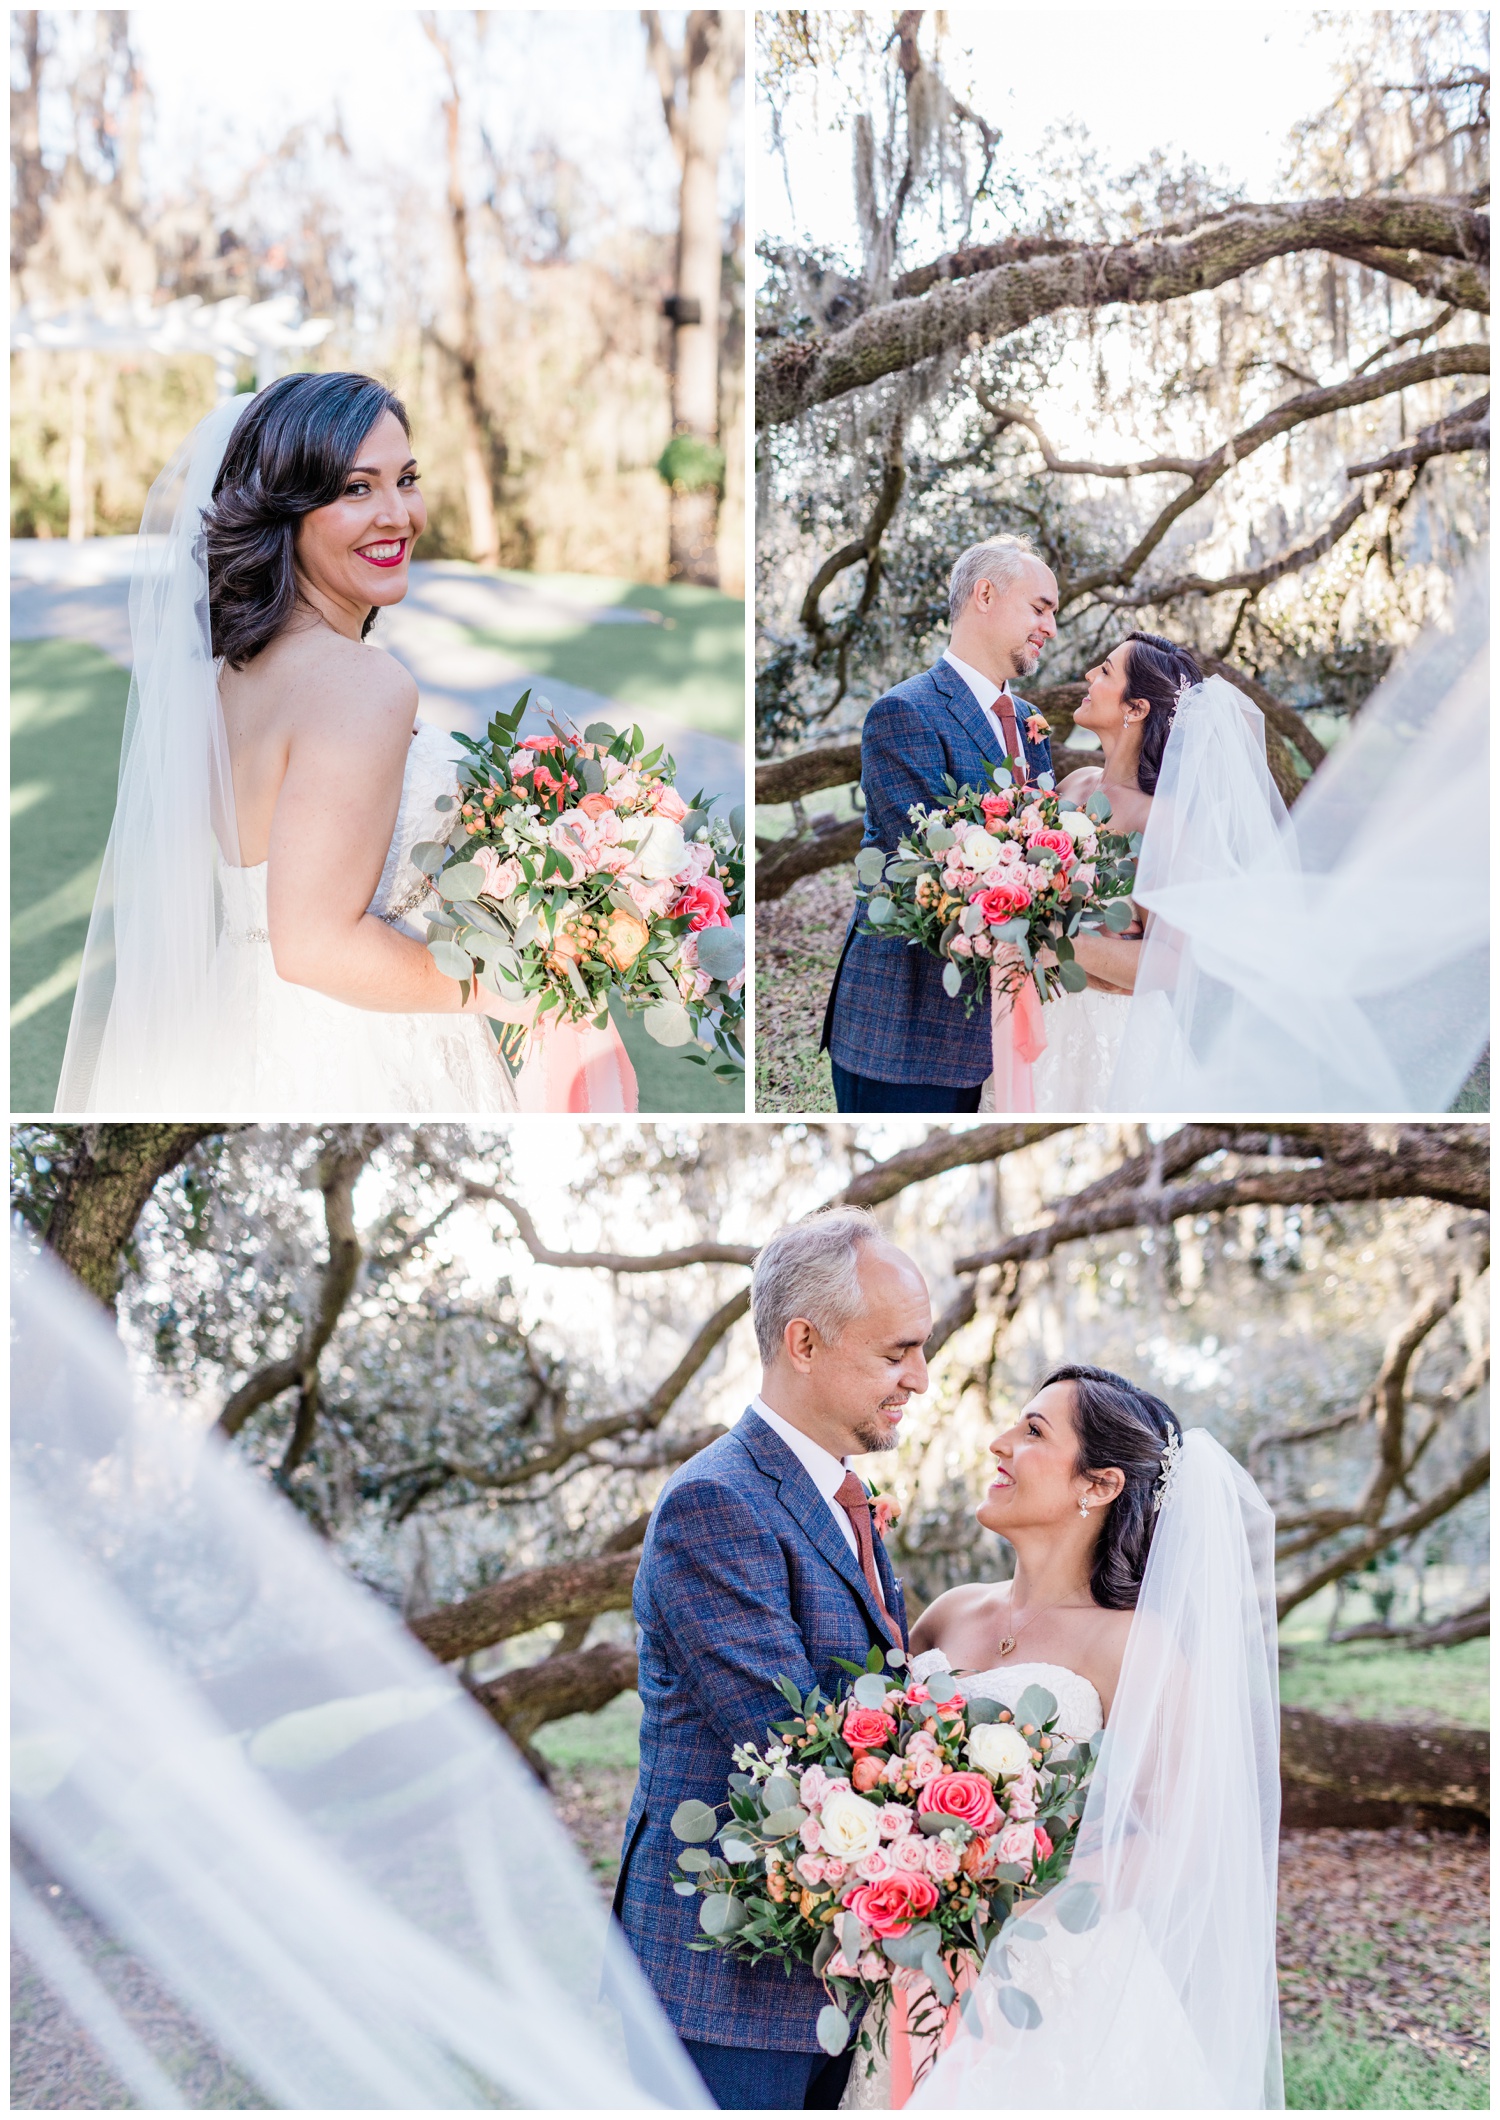 Couples portraits - the savannah elopement package - the mackey house - flowers by ivory and beau